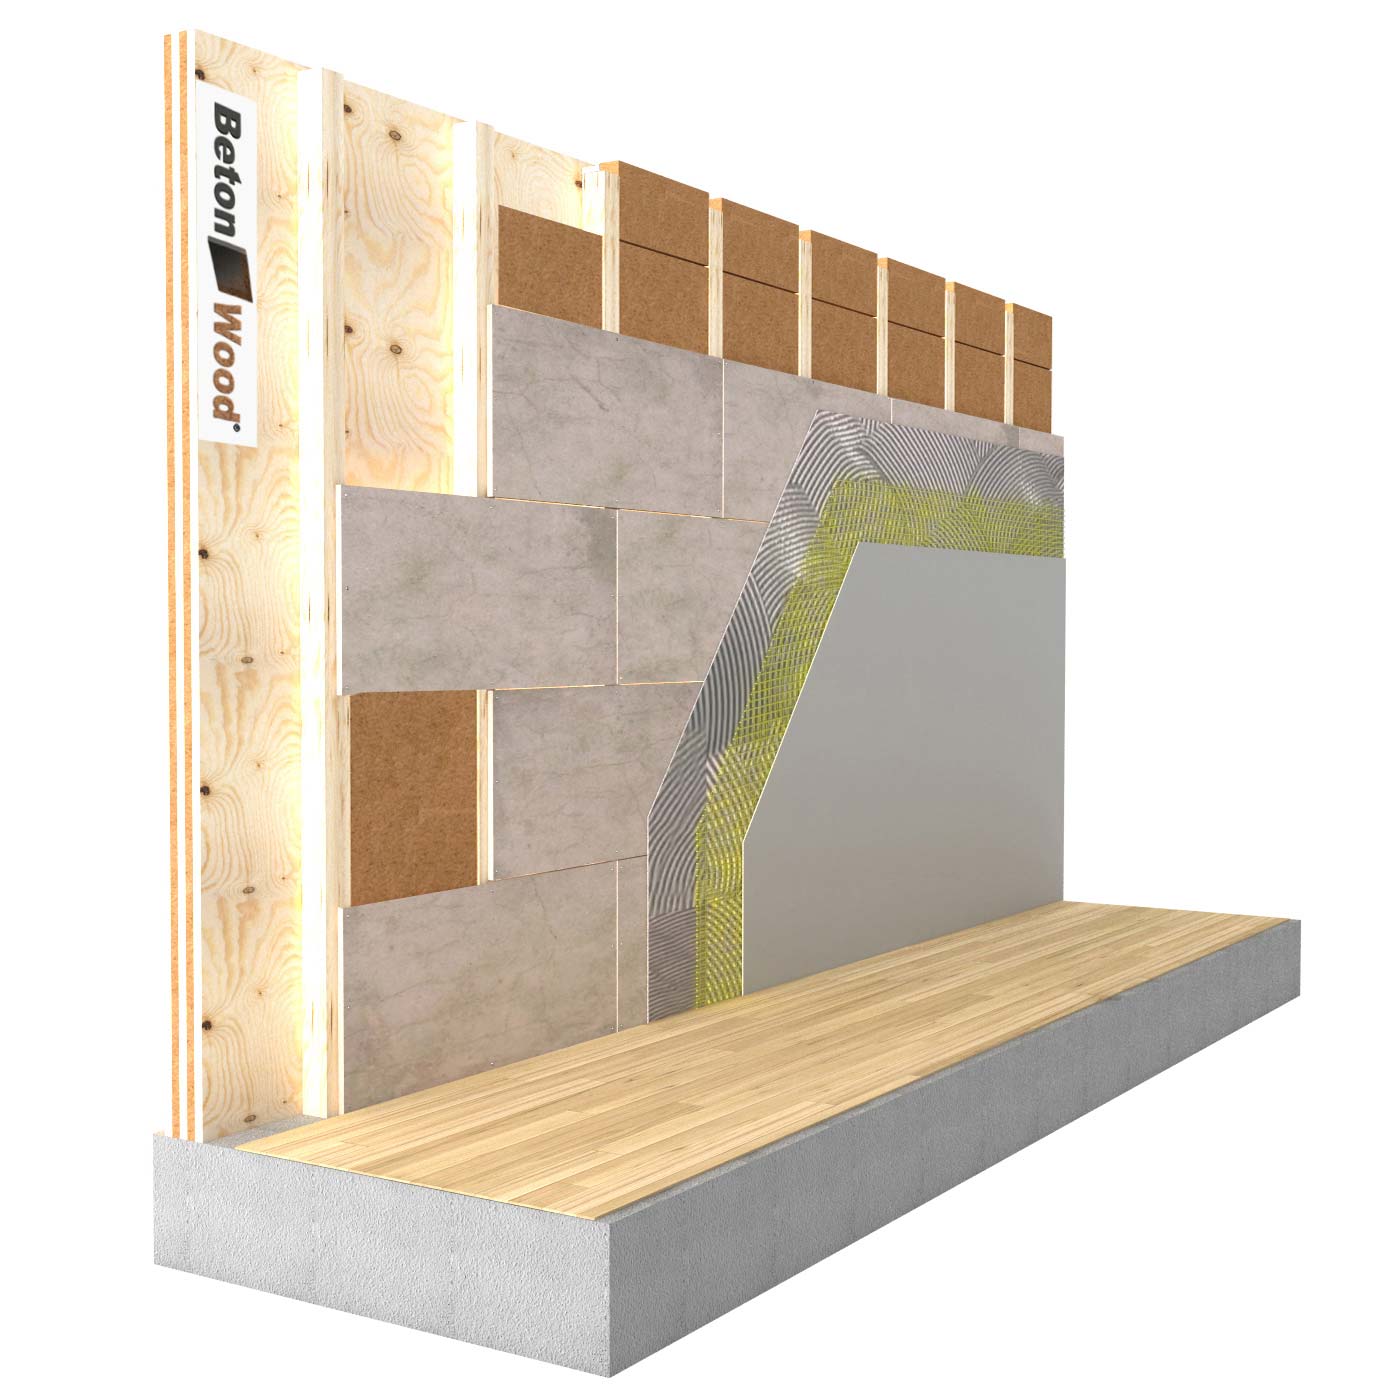 Internal insulation system in Protect Fiber Wood and cement bonded particle board